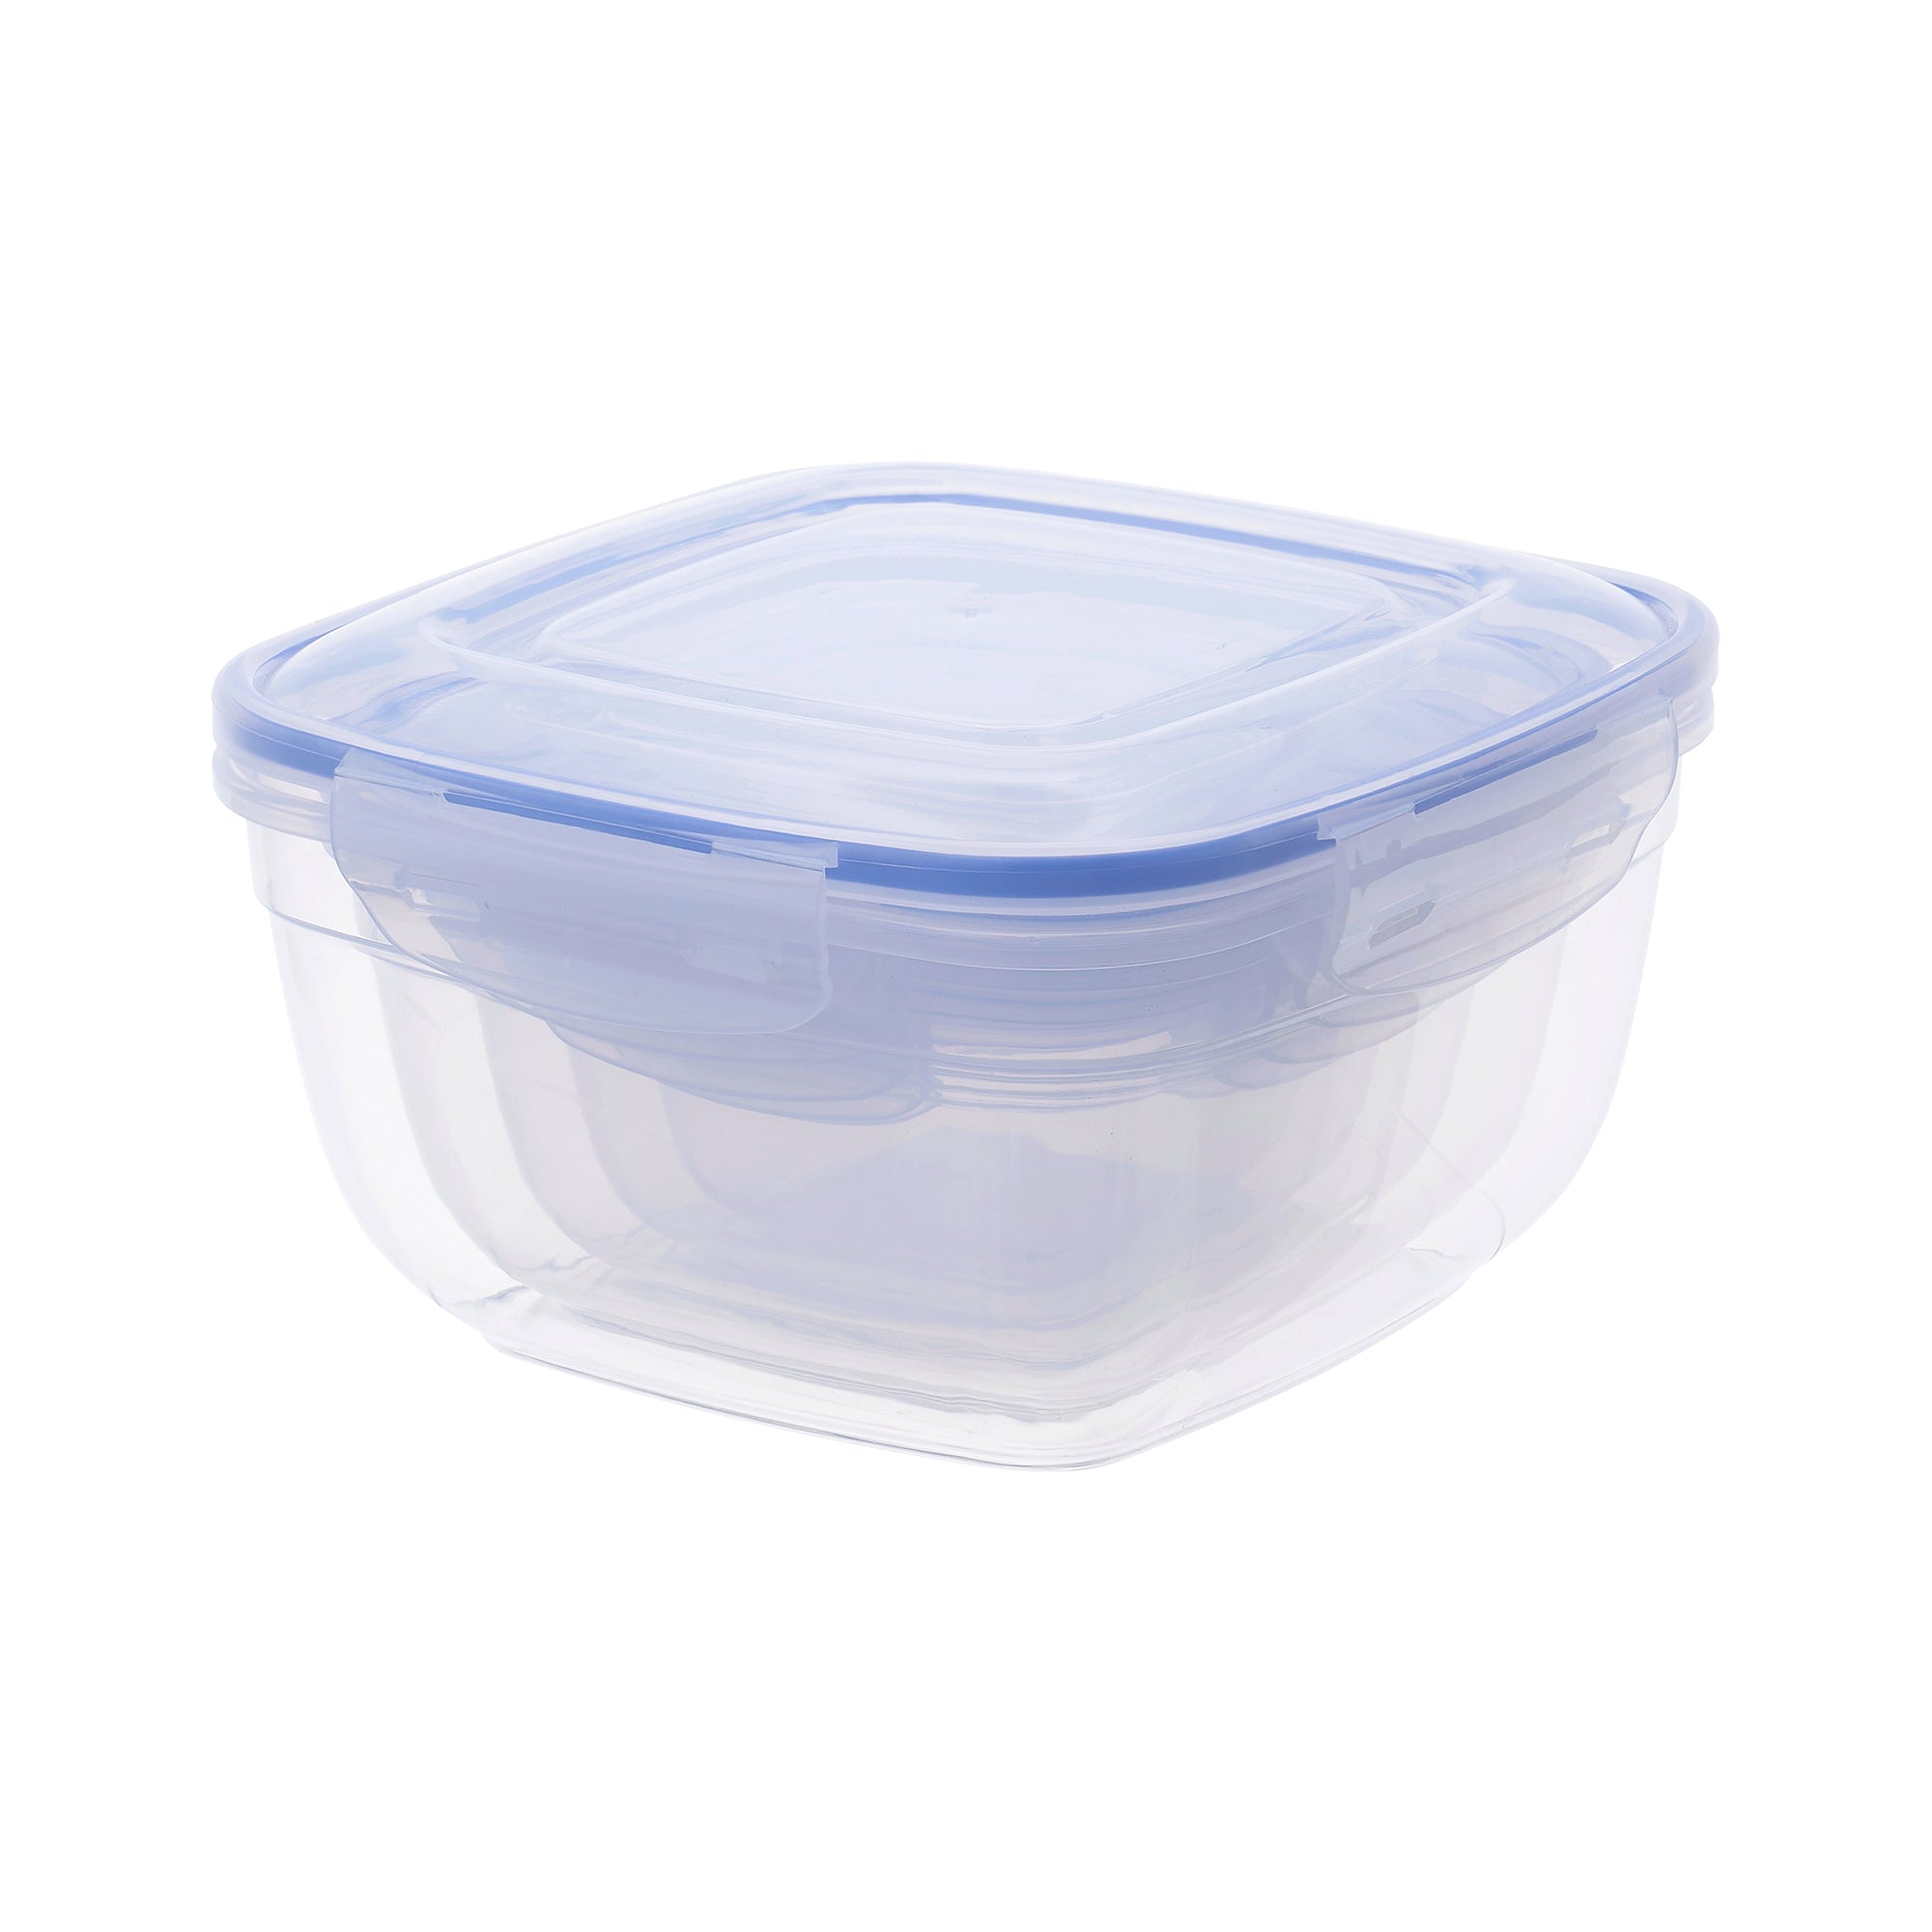 Aoibox 4-Piece/4L Airtight Food Storage Containers Set for Kitchen